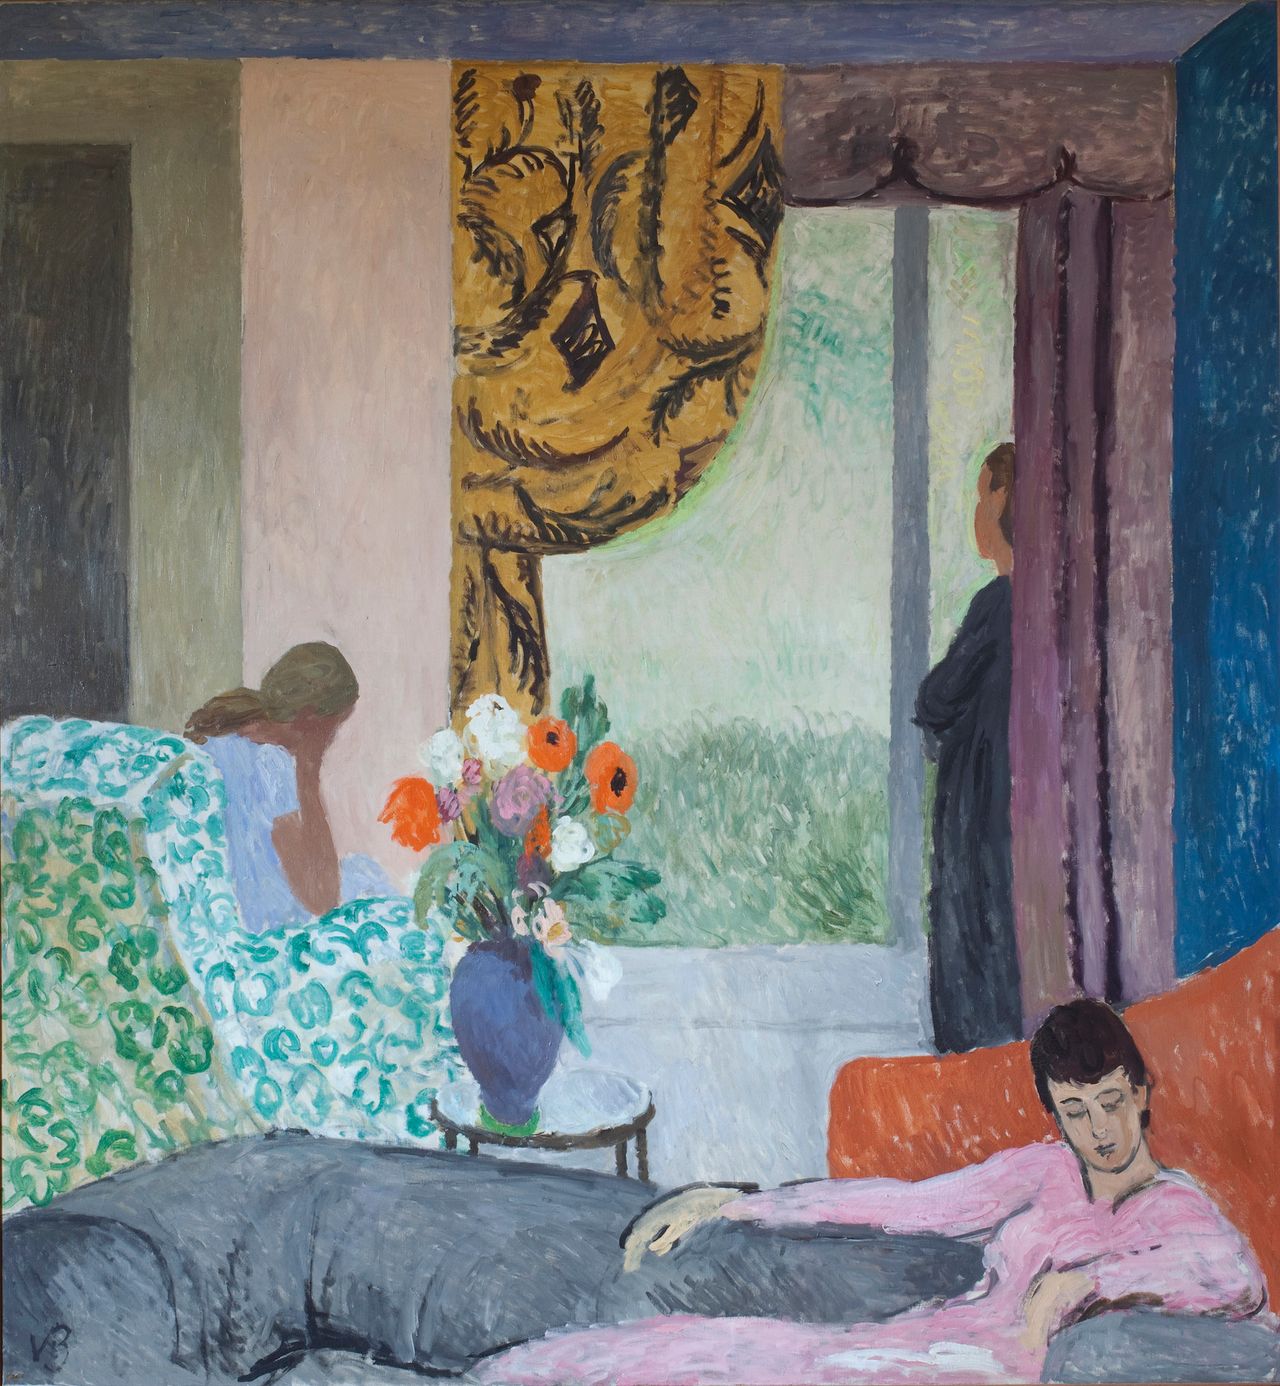 Vanessa Bell, "The Other Room," late 1930s, 161 x 174 cm, Private Collection, © The Estate of Vanessa Bell, courtesy of Henrietta Garnett